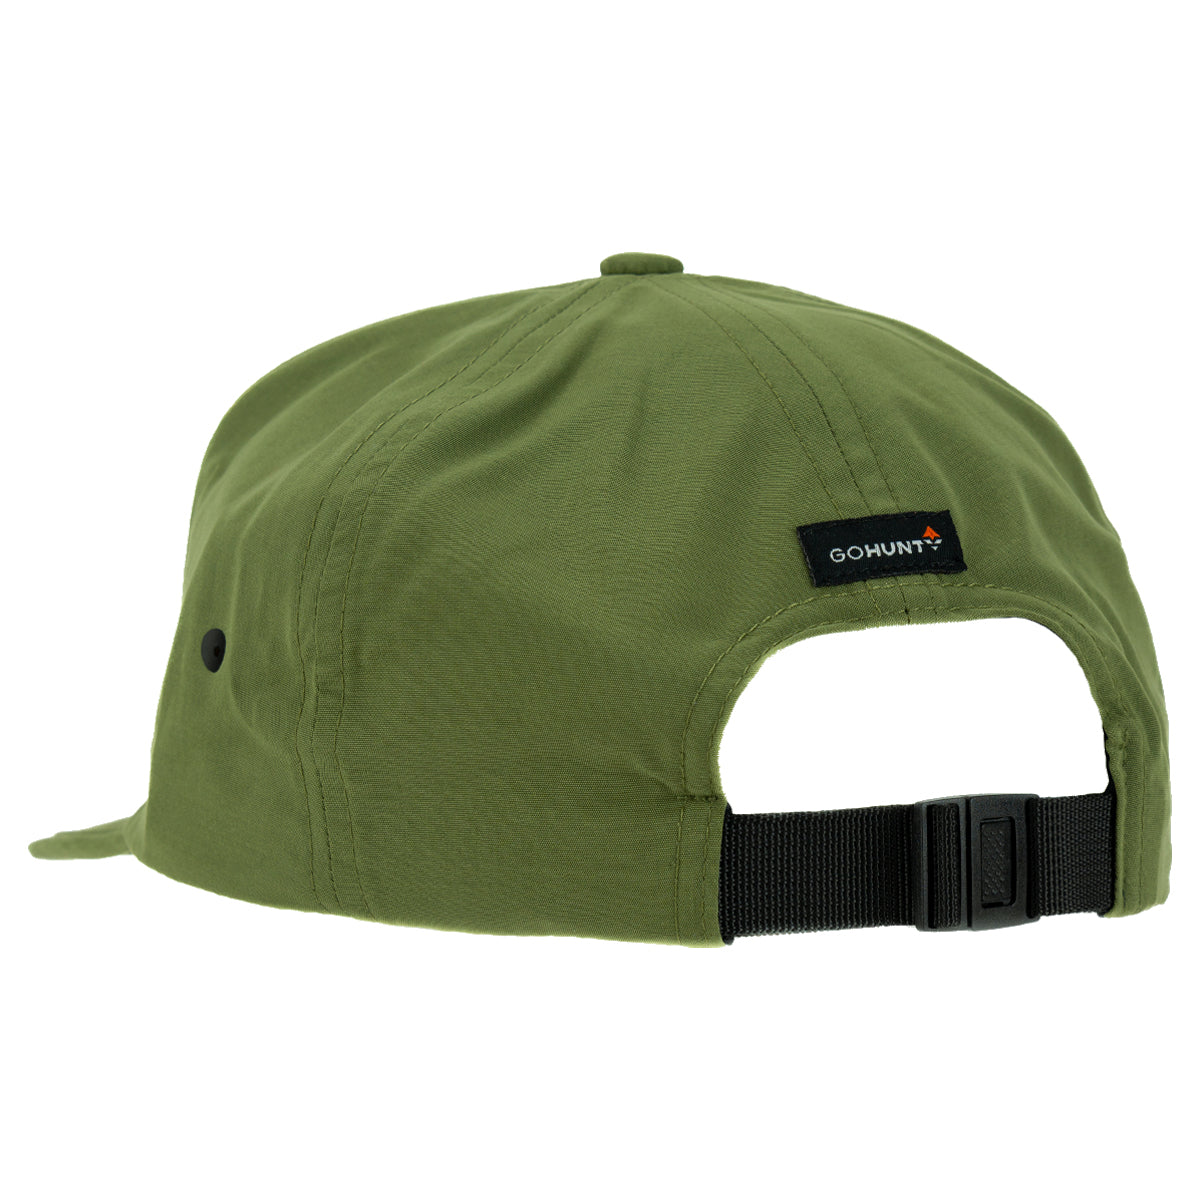 GOHUNT Softie 2.0 in Olive by GOHUNT | GOHUNT - GOHUNT Shop